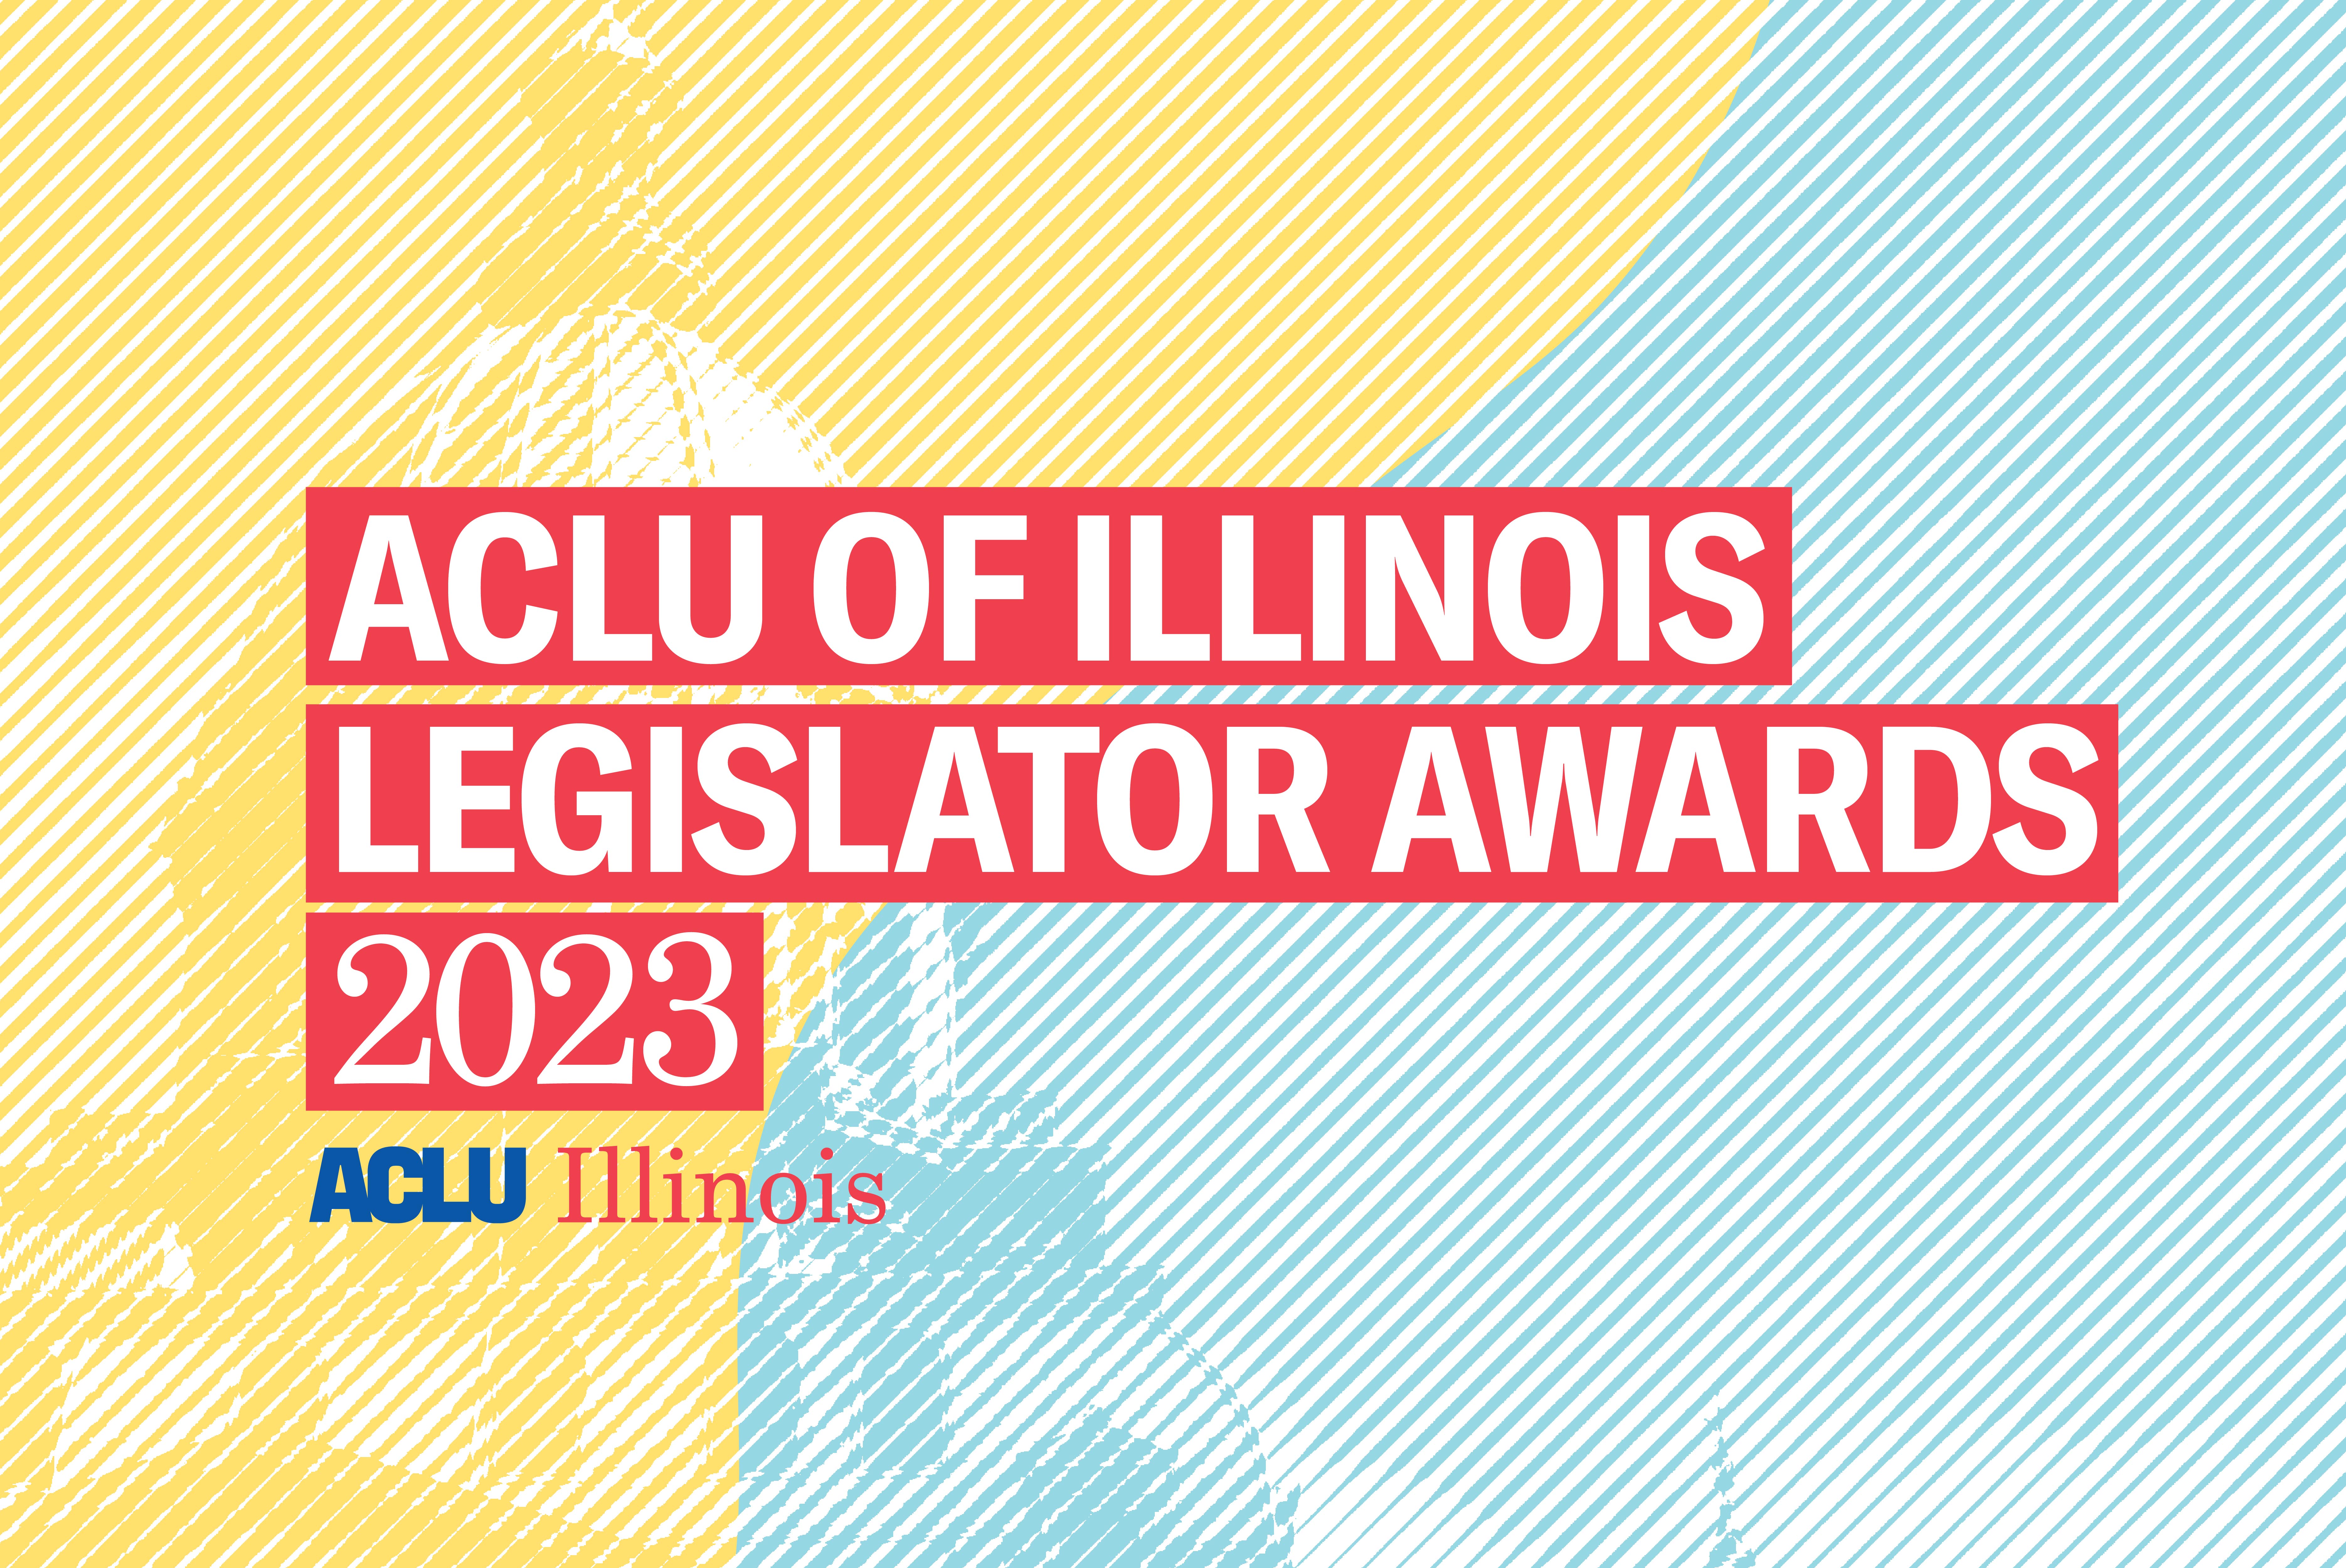 Yellow and blue filtered image of the Capitol Building in Springfield. White text over a red background "ACLU of Illinios Legislator Awards 2023"